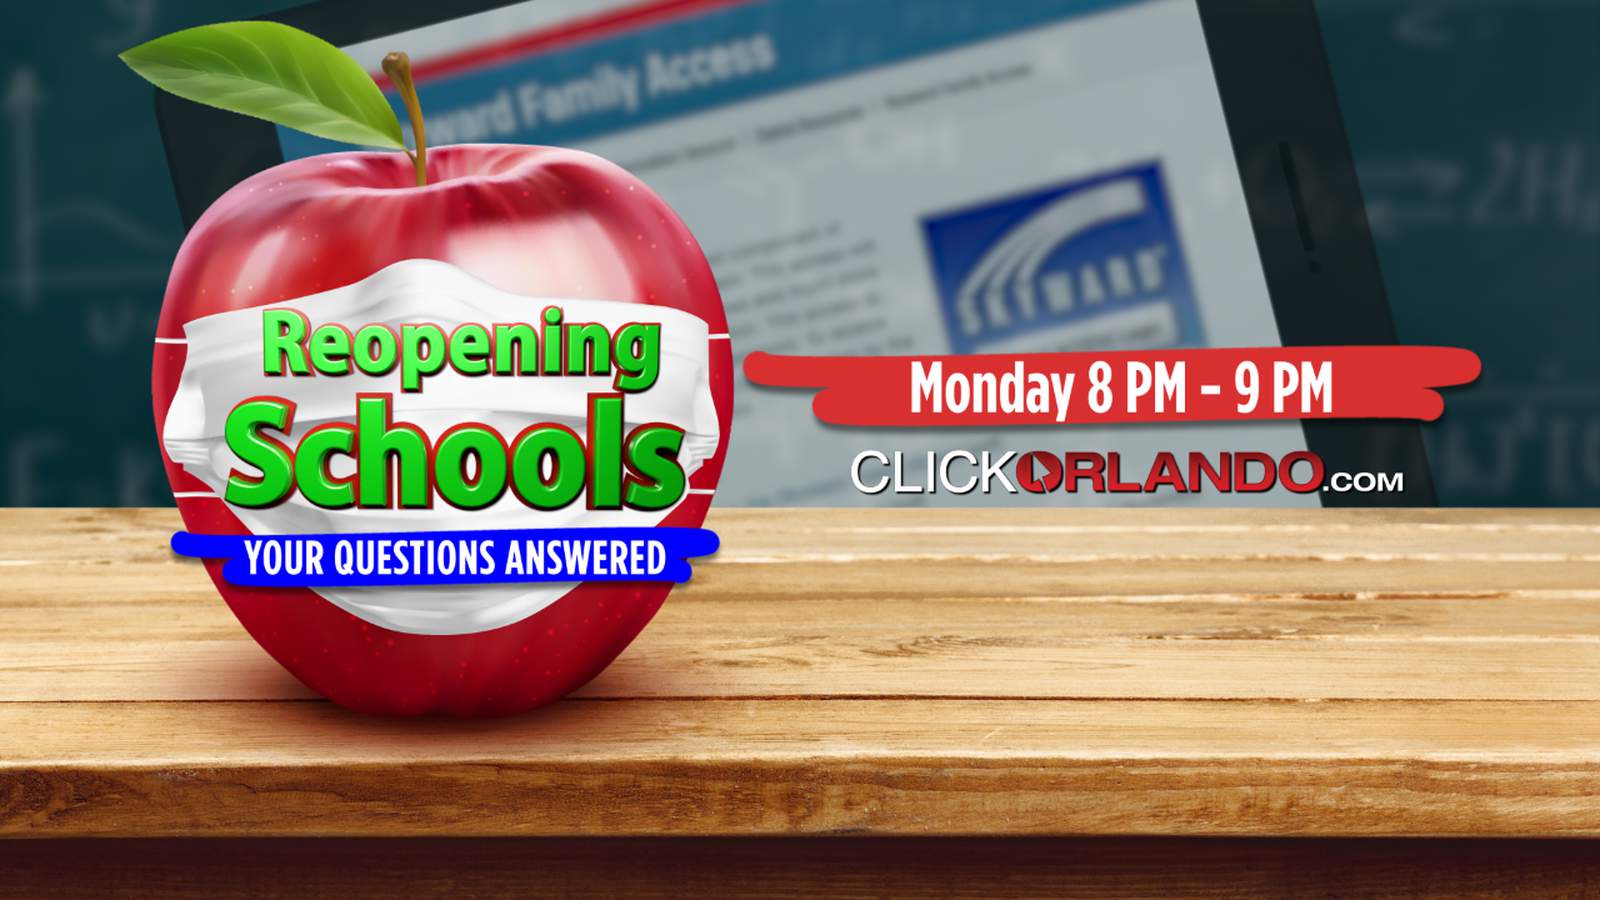 News 6 to host town hall on schools reopening